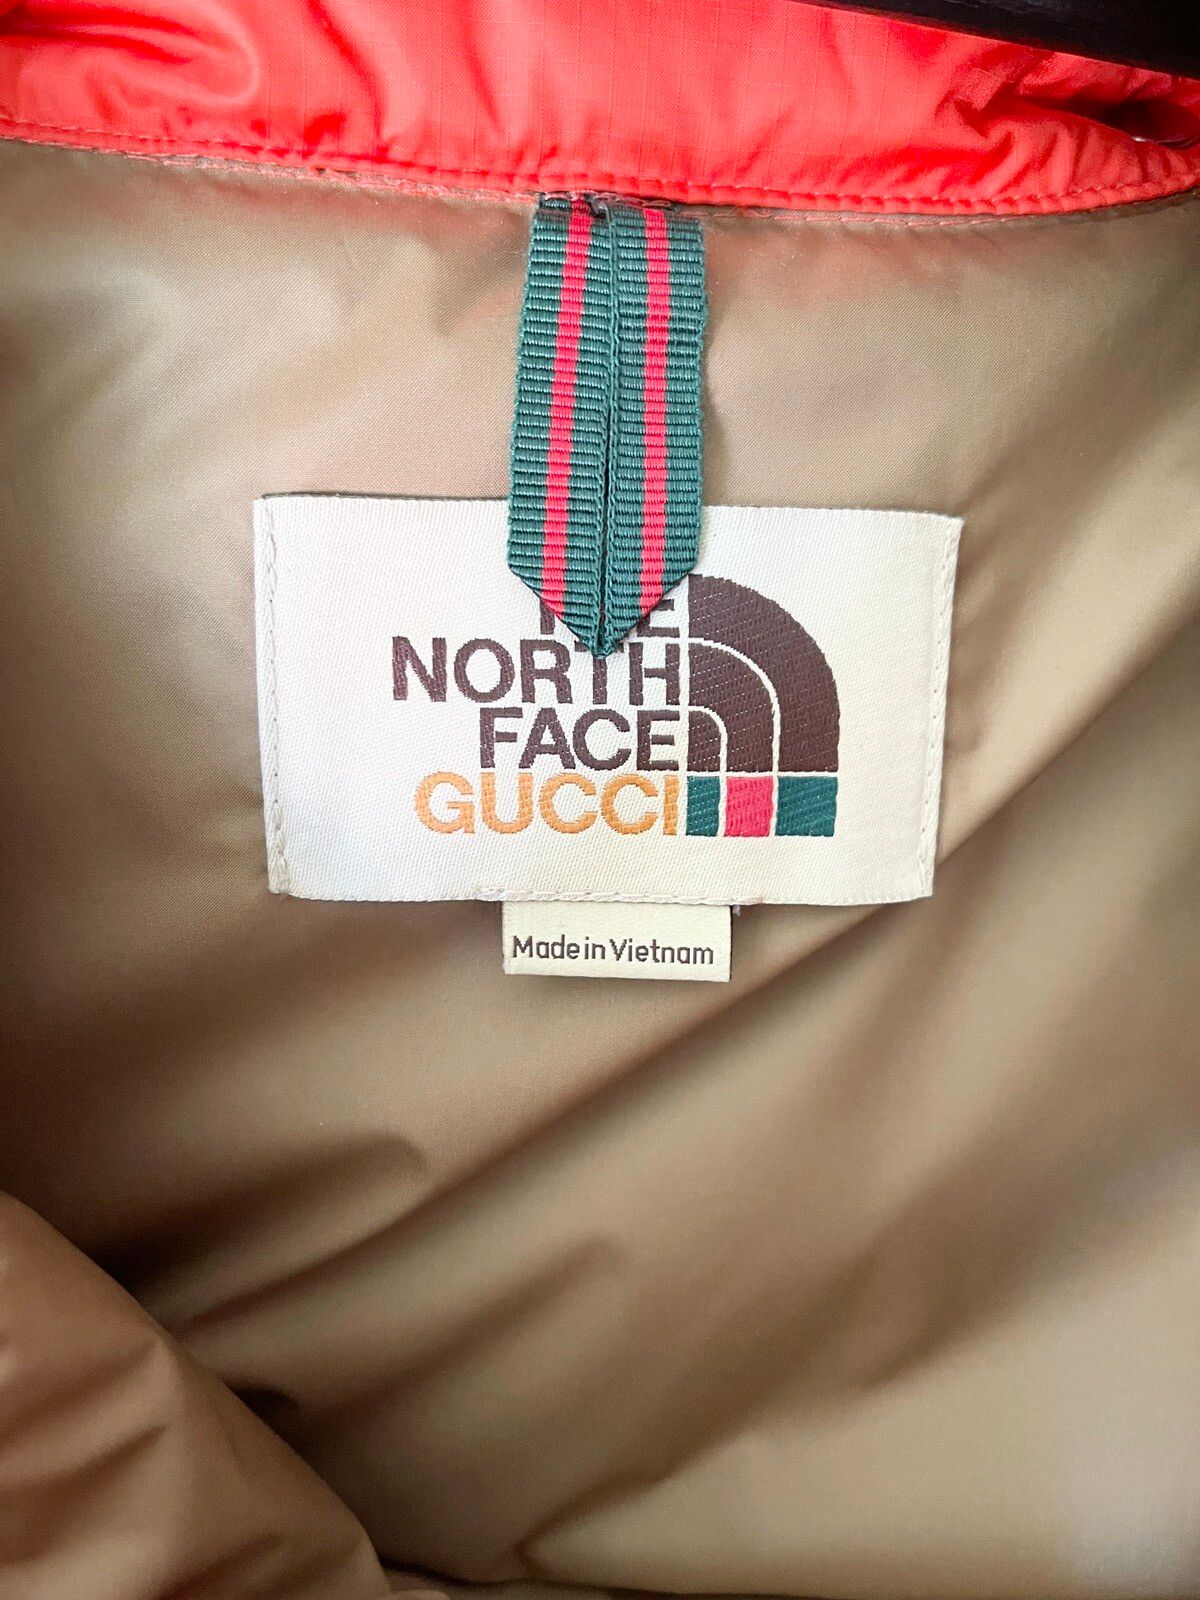 GRAIL! 2021 Gucci x The North Face Puffer Jacket in Large - 13